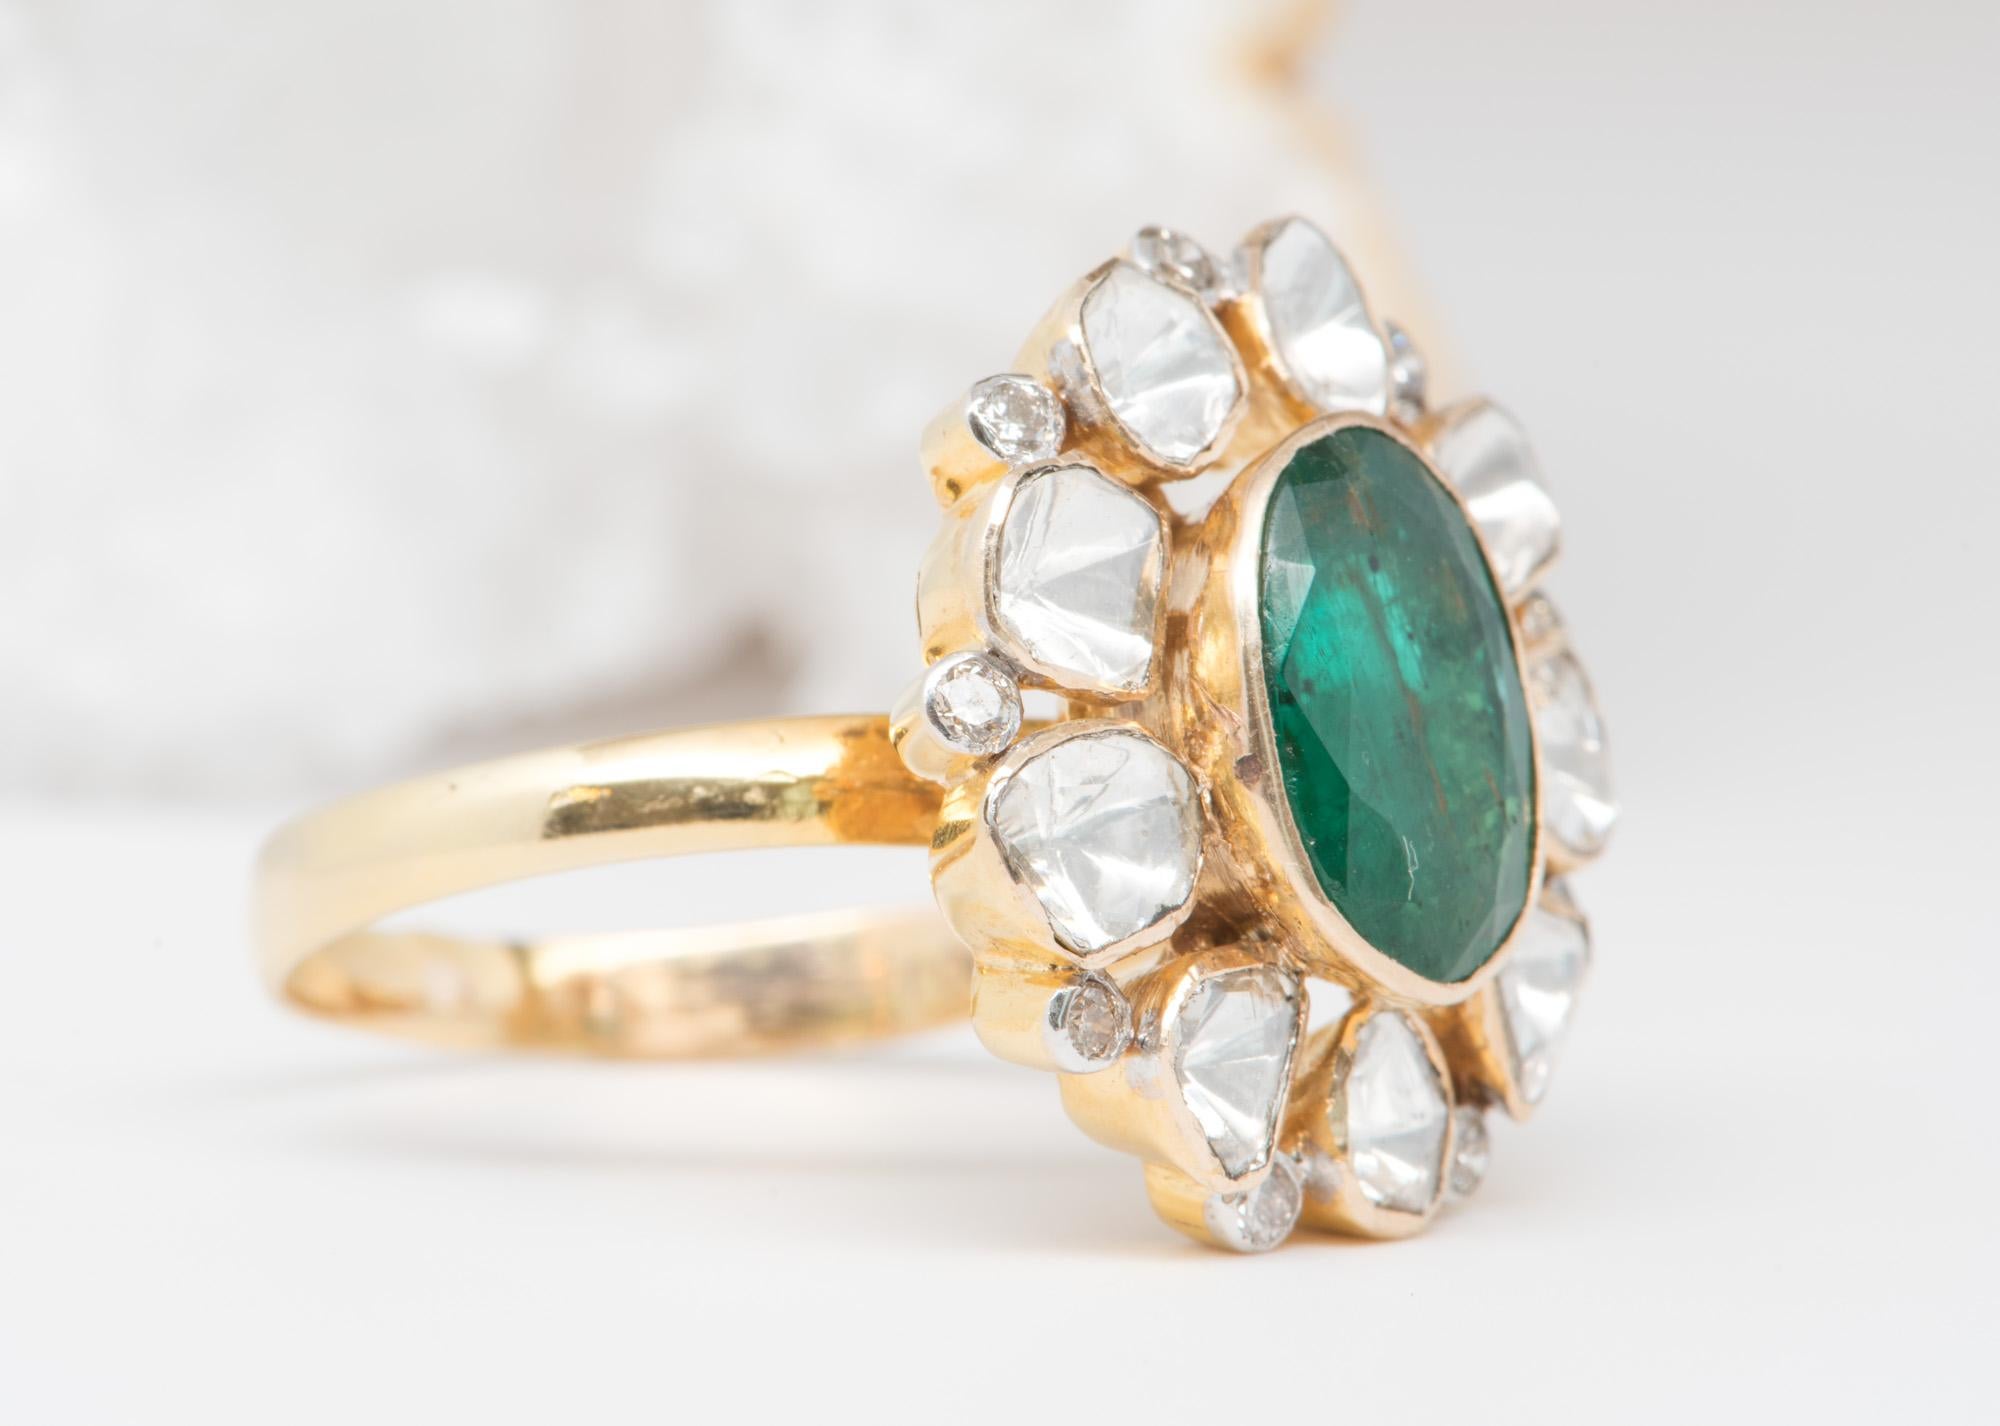 ♥  Solid 14K yellow gold ring set with an oval-shaped emerald in the center, flanked by halo of diamond slices and brilliant cut diamonds 
♥  The diamond slices have a foil-back finish to give it more brilliance and the illusion that these are